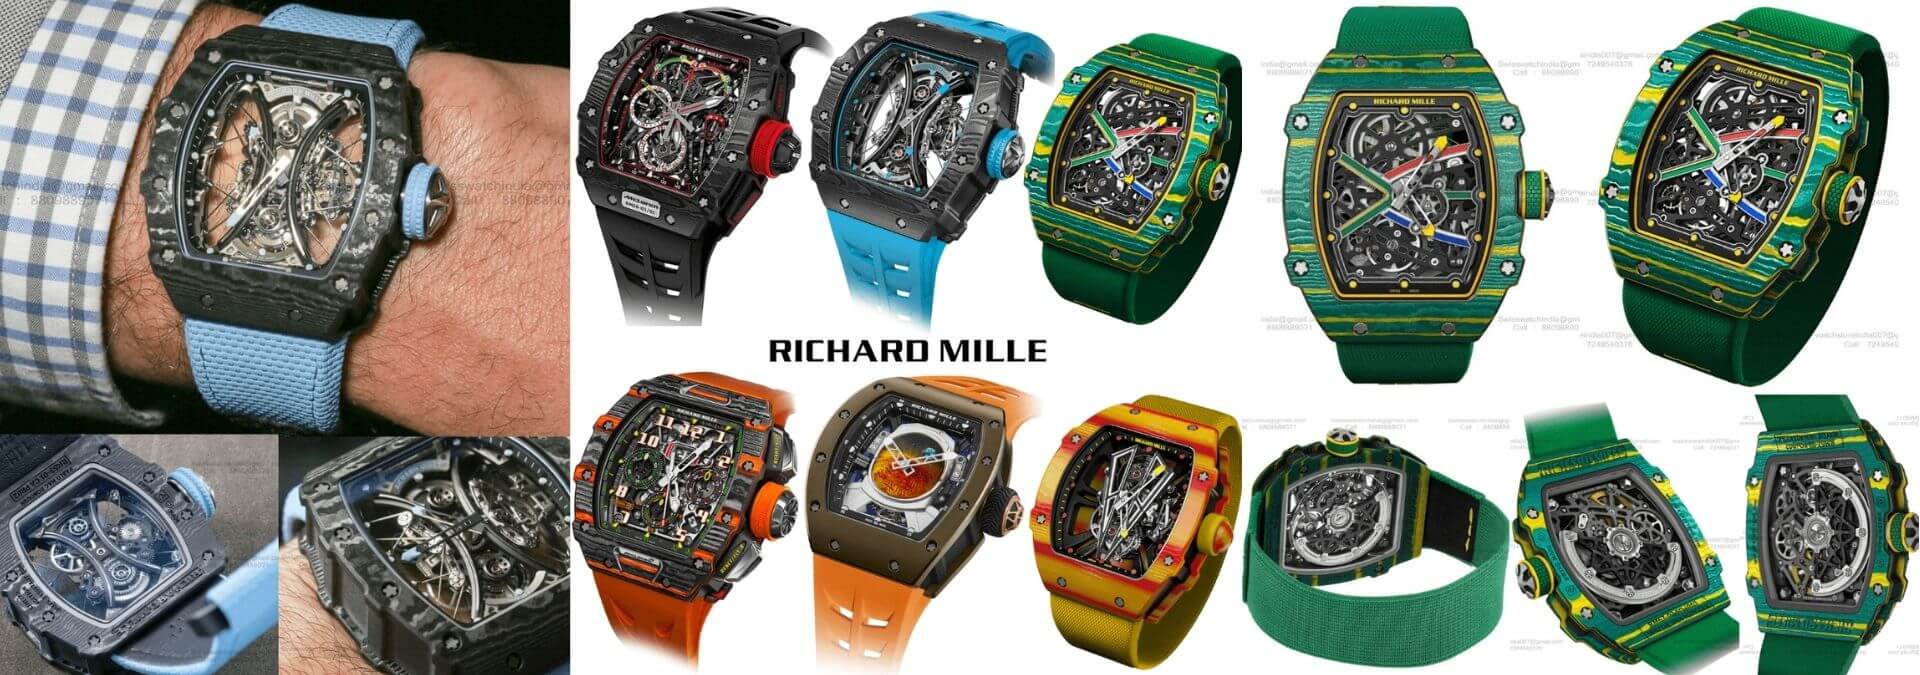 richard mille first copy watches in India